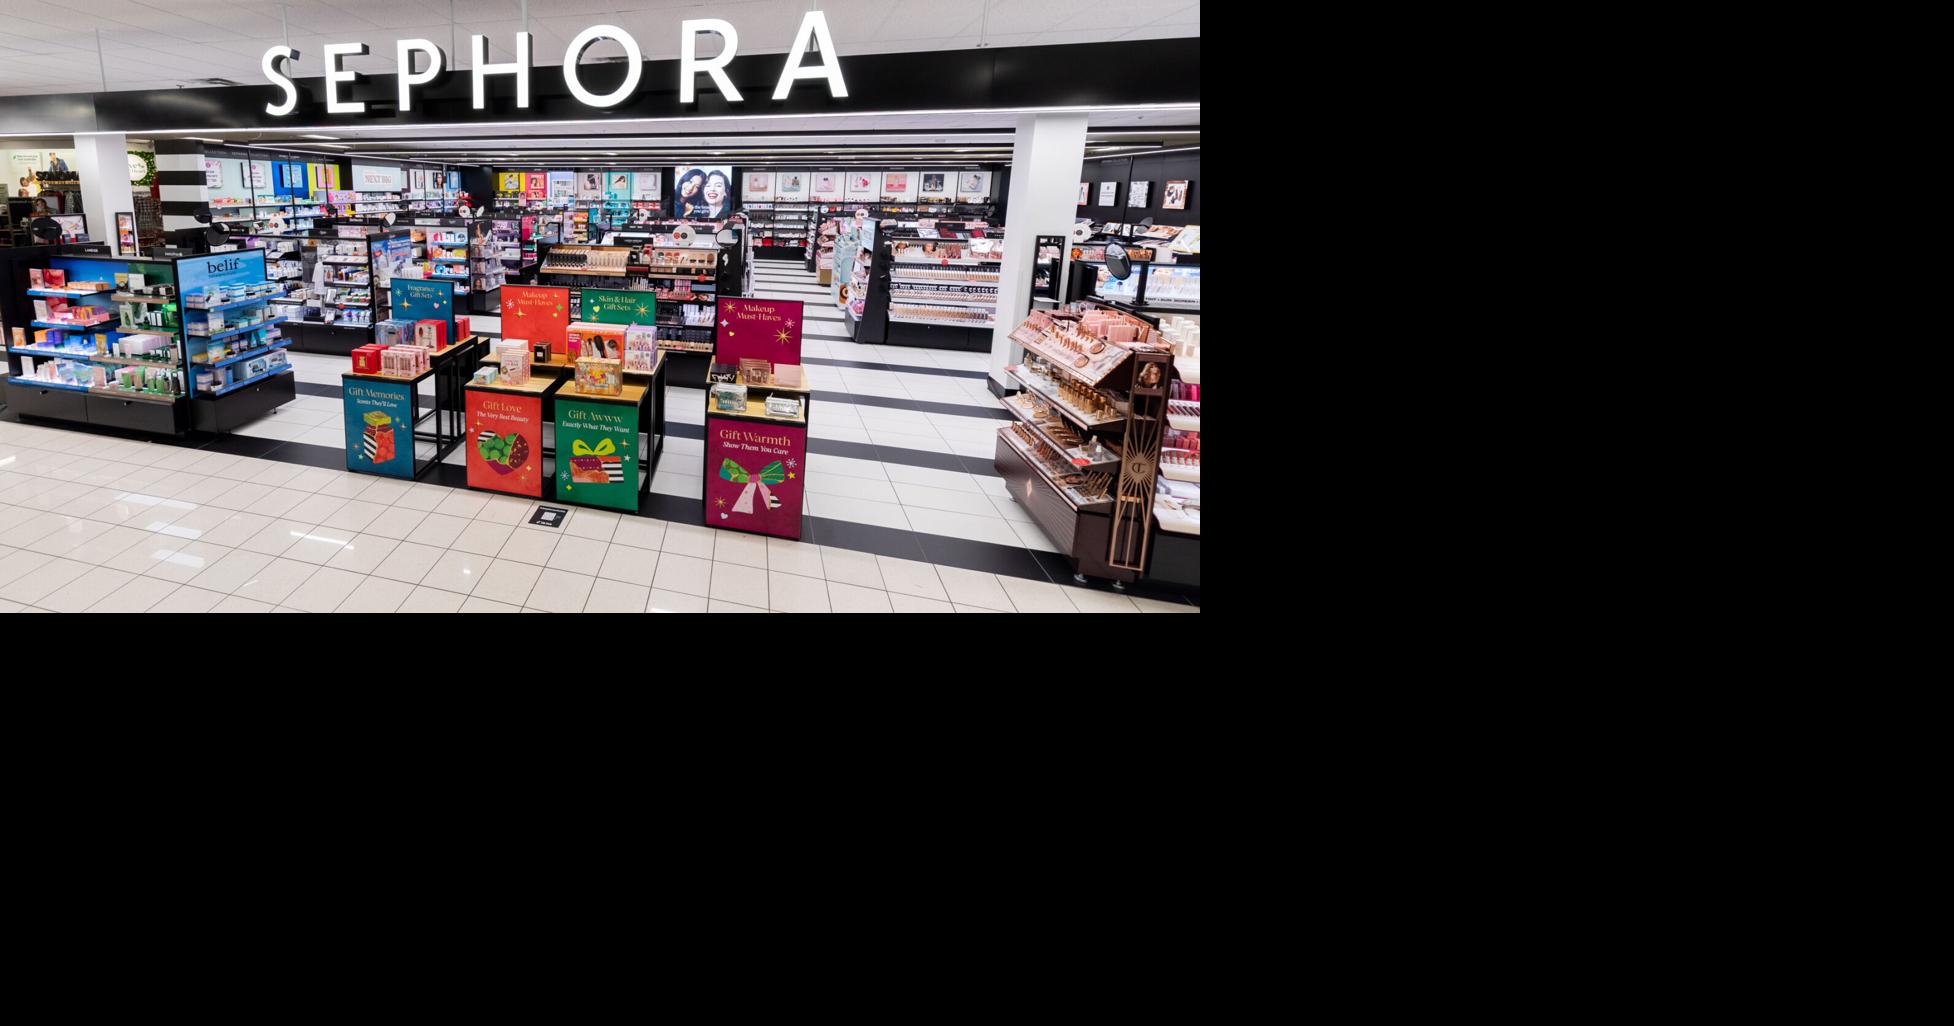 Sephora to open Athens store in Beechwood